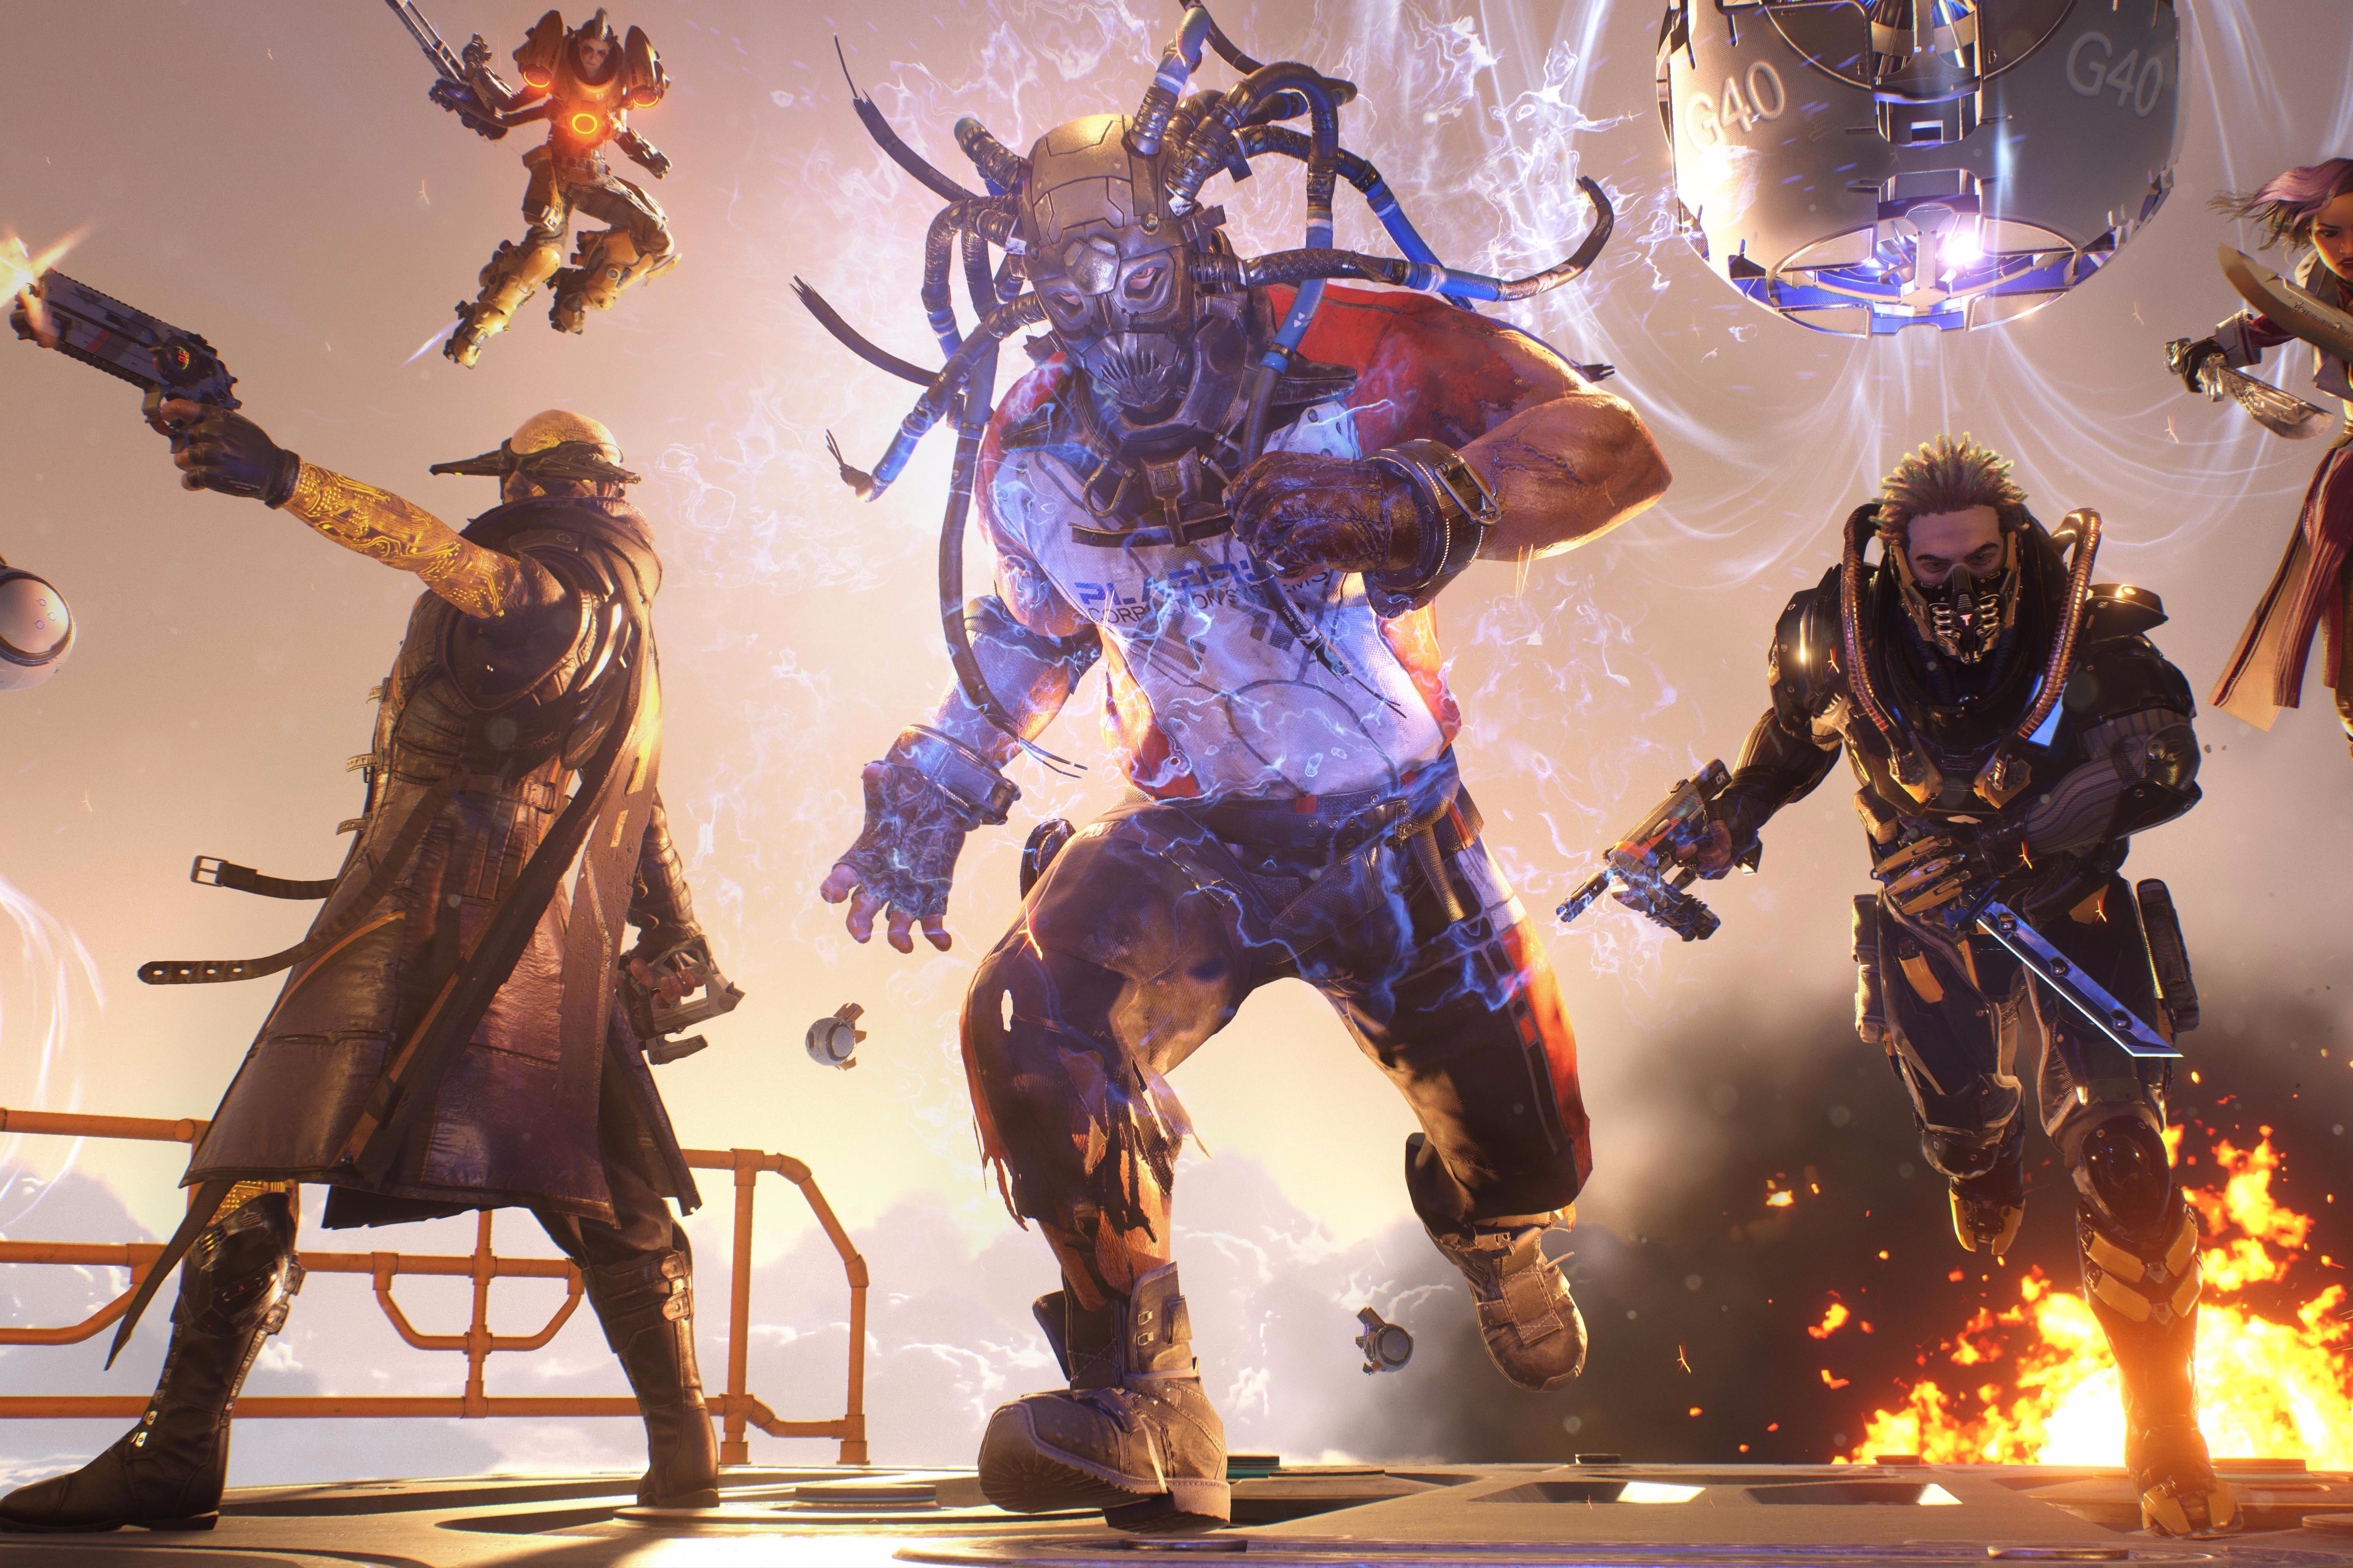 Image for LawBreakers coming to PS4, promises no "pay-to-win" mechanics